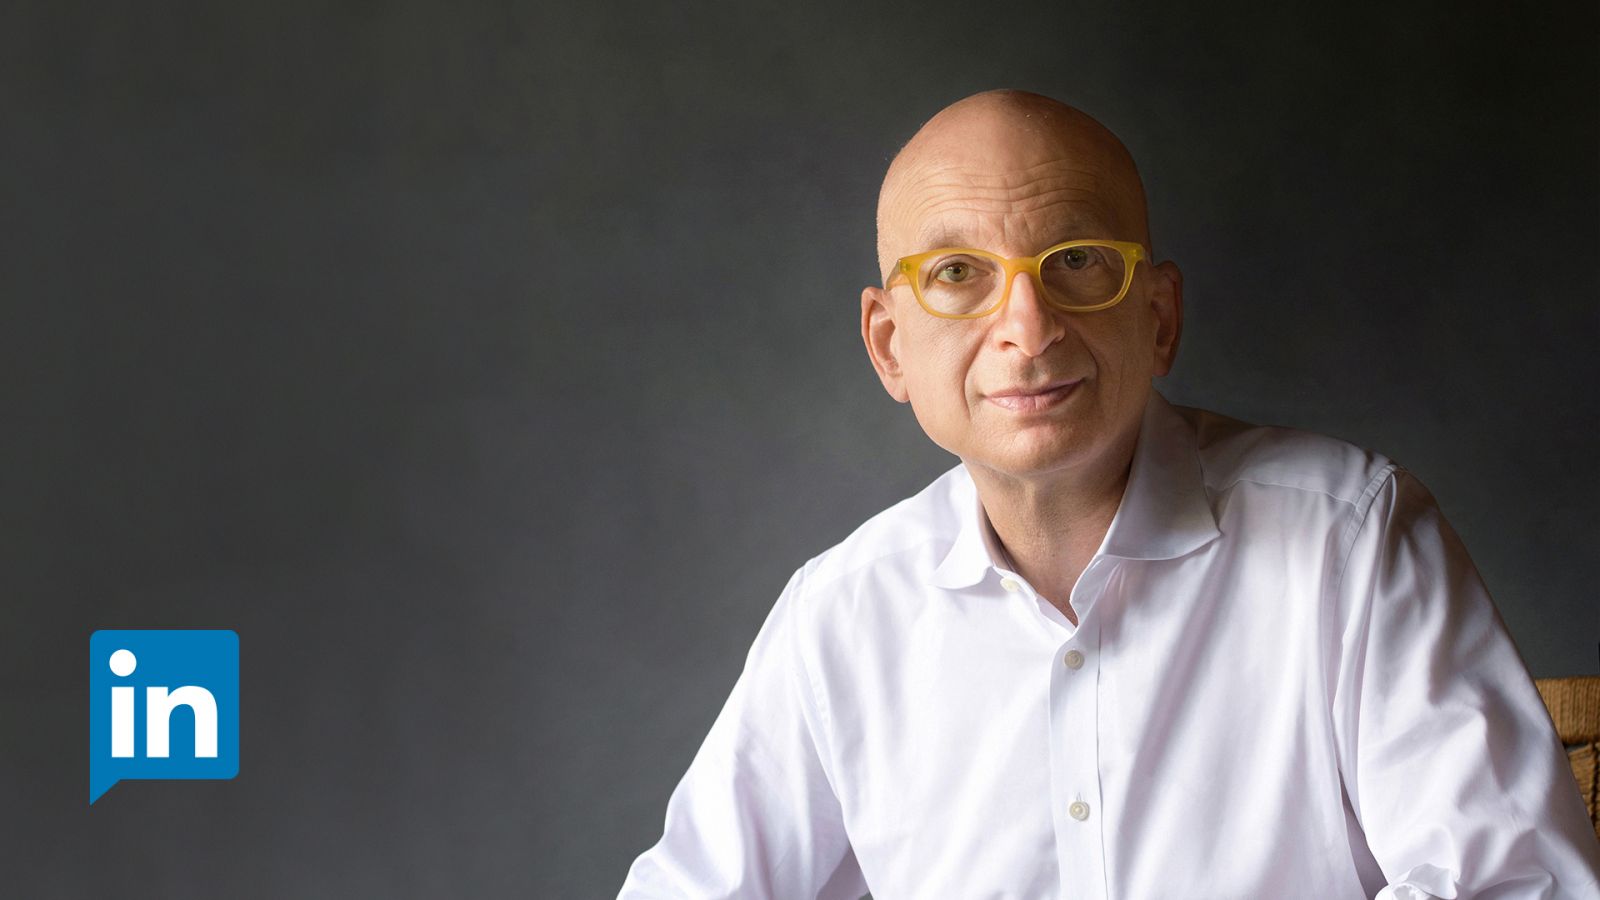 5 recruiting tips from expert Seth Godin